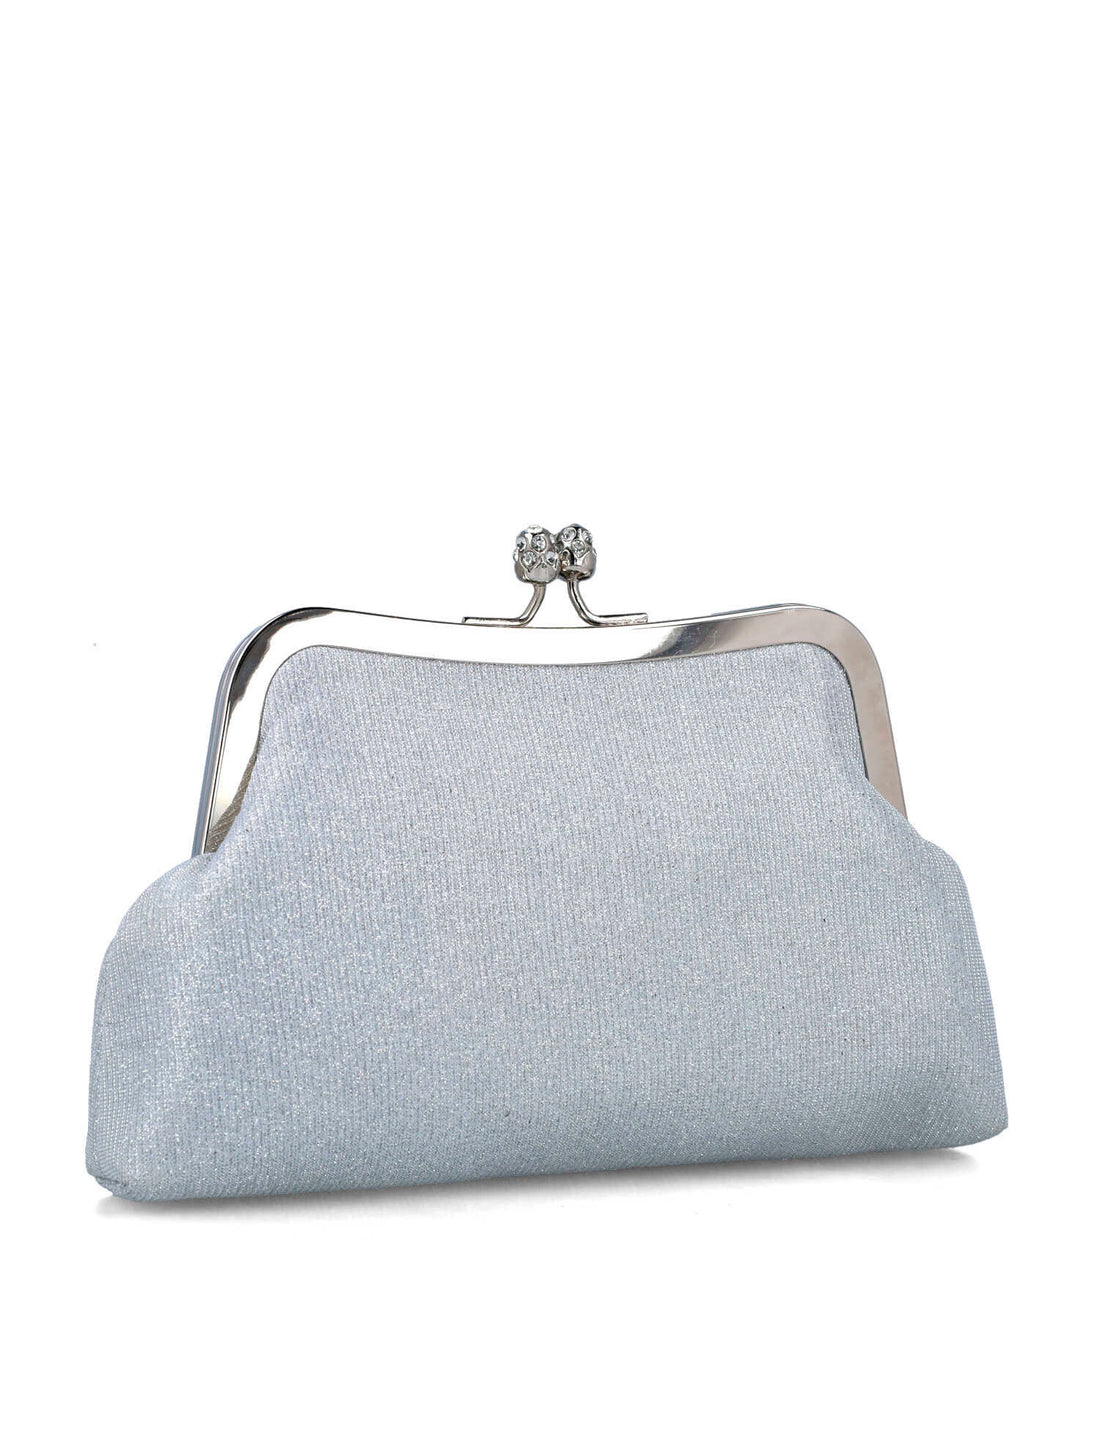 Pouch Style Clutch_85630_09_02